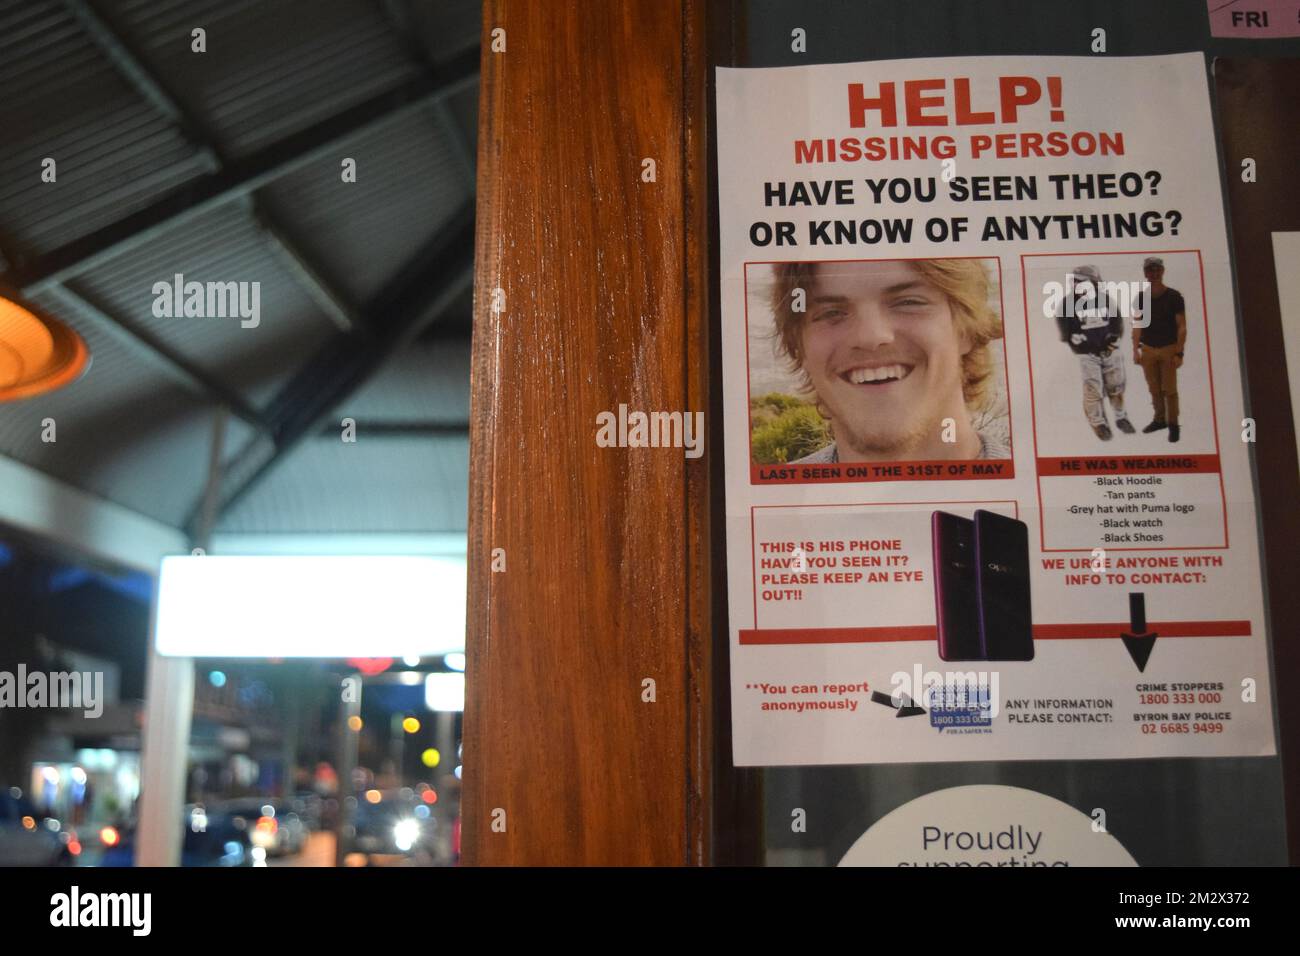 Illustration picture shows a shop window with a 'missing person' poster for missing Theo regarding the disappearance of 18-year old Theo Hayez, a Belgian student who was traveling in the area, in Byron Bay, Australia, Monday 01 July 2019. Hayez was last seen leaving Cheeky Monkey night club in Byron Bay, New South Wales on May 31. A team of Belgian researchers has traveled to Byron Bay to assist in the search for the missing boy. BELGA PHOTO MARIE-PAULINE DESSET  Stock Photo